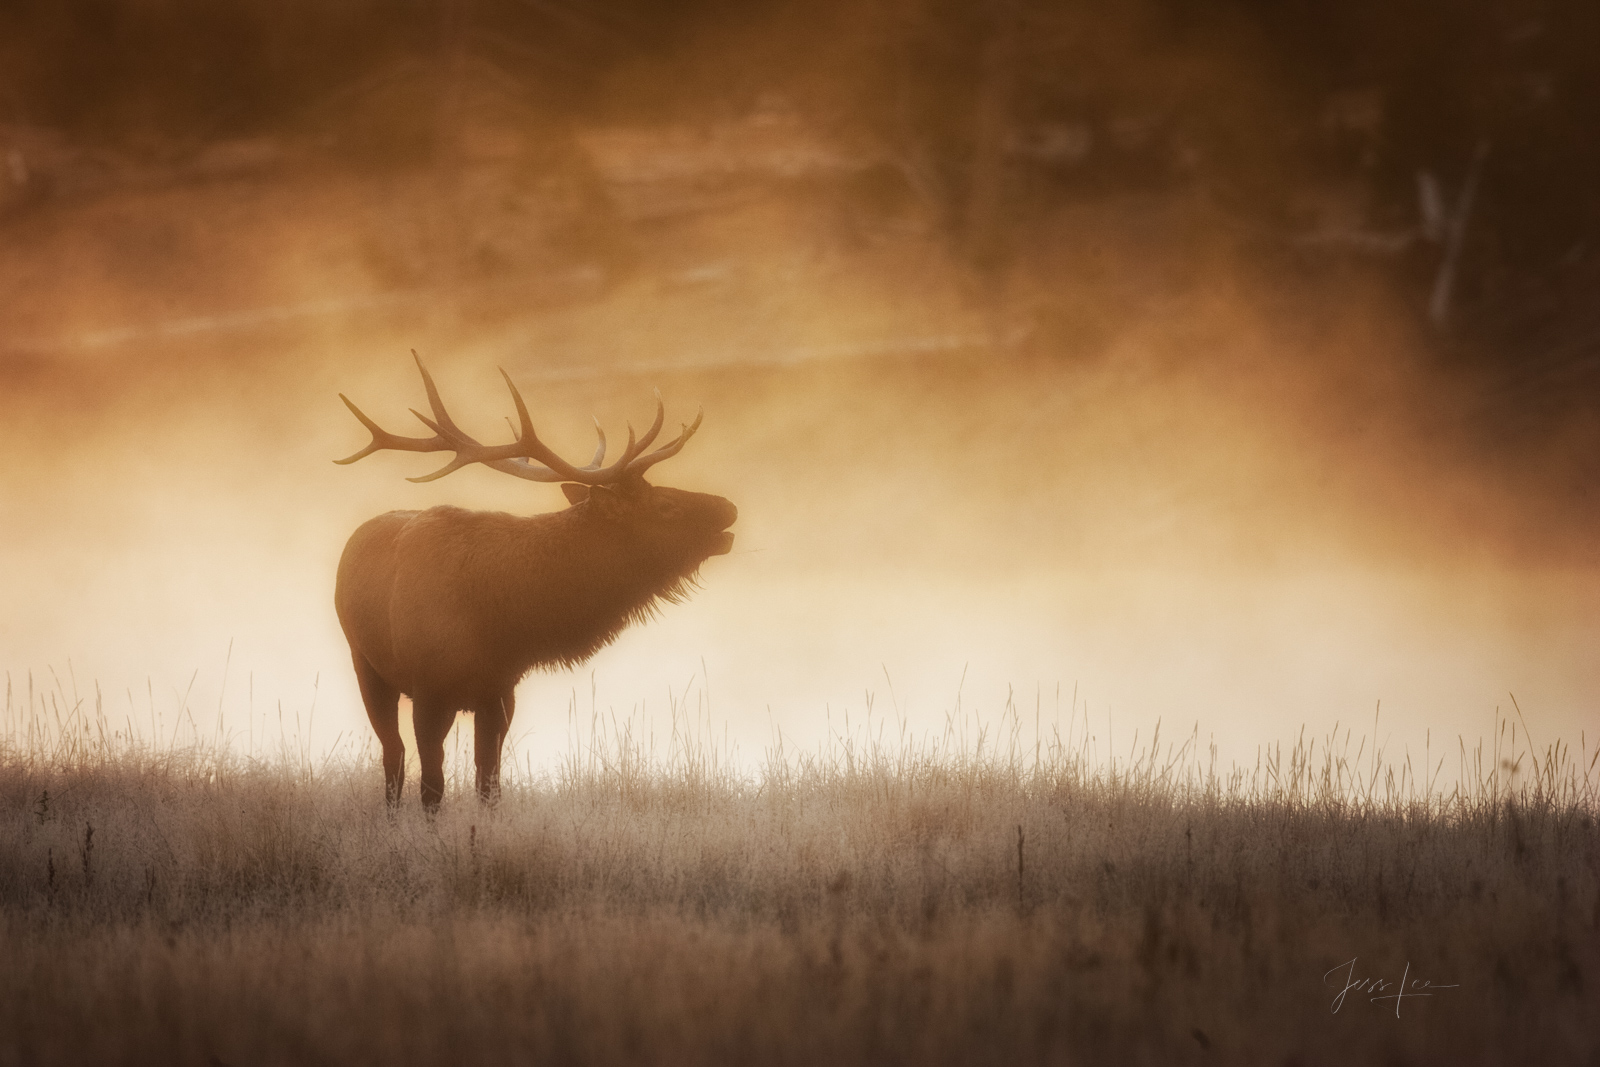 Elk Photos | Wildlife Photography Prints for Sale | Photos by Jess Lee